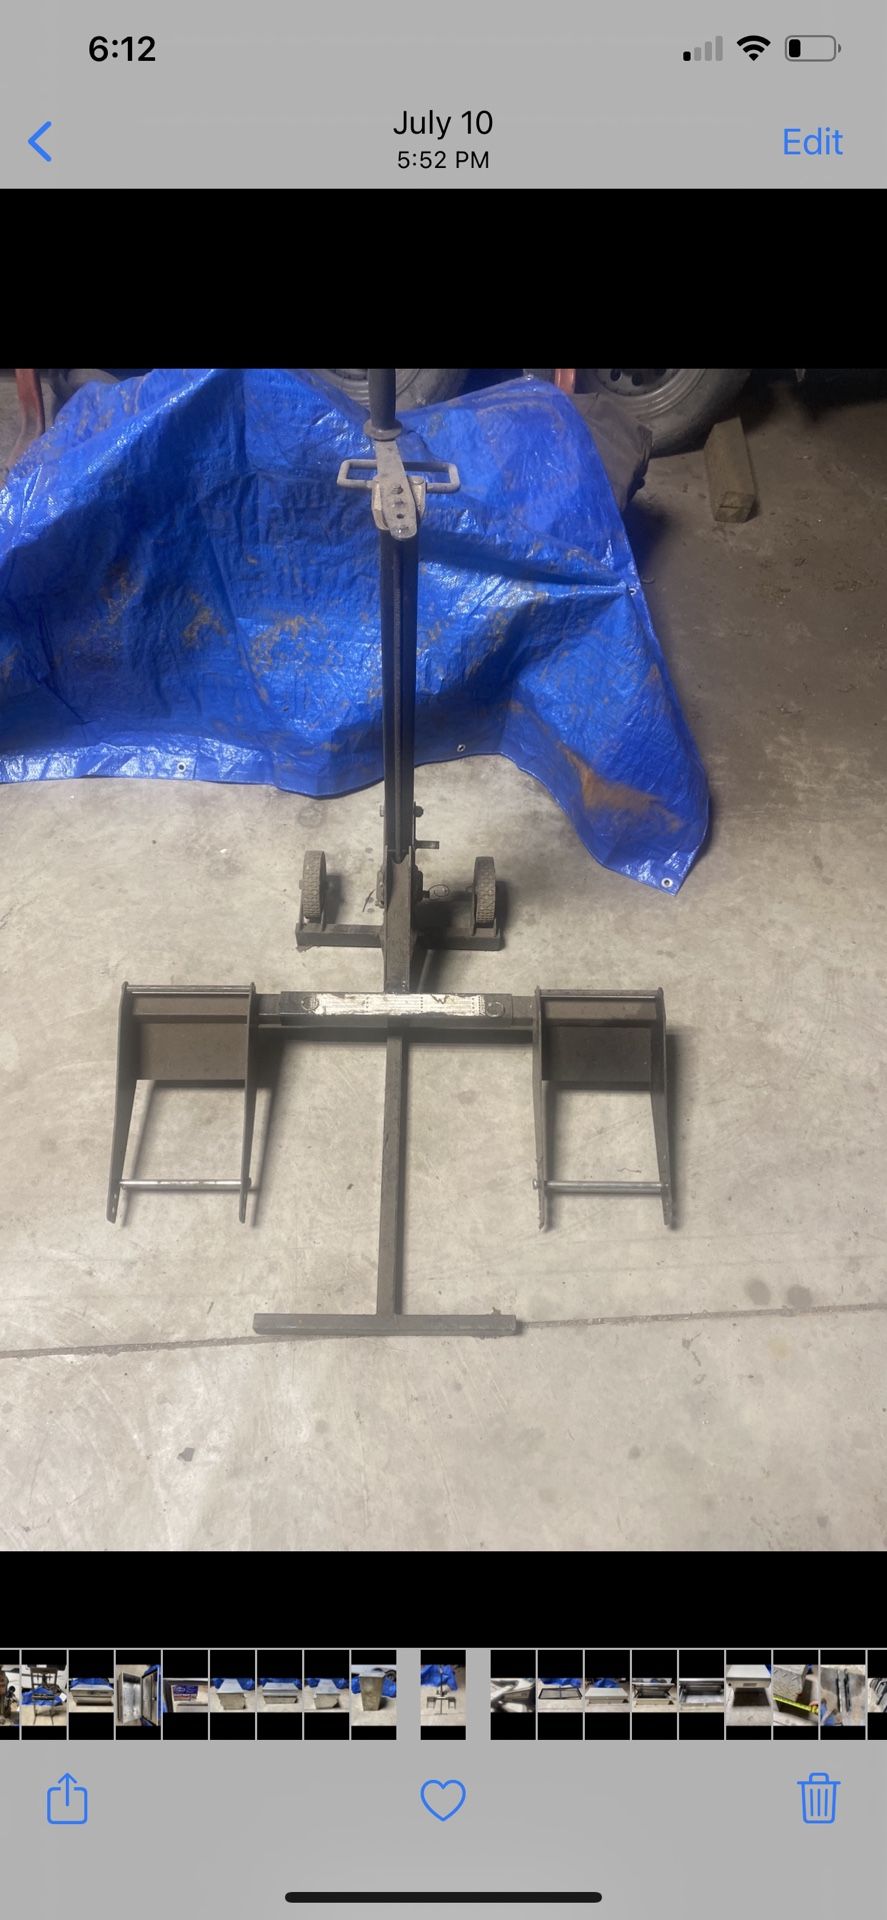 Lawn Mower Lift Made By MowJack